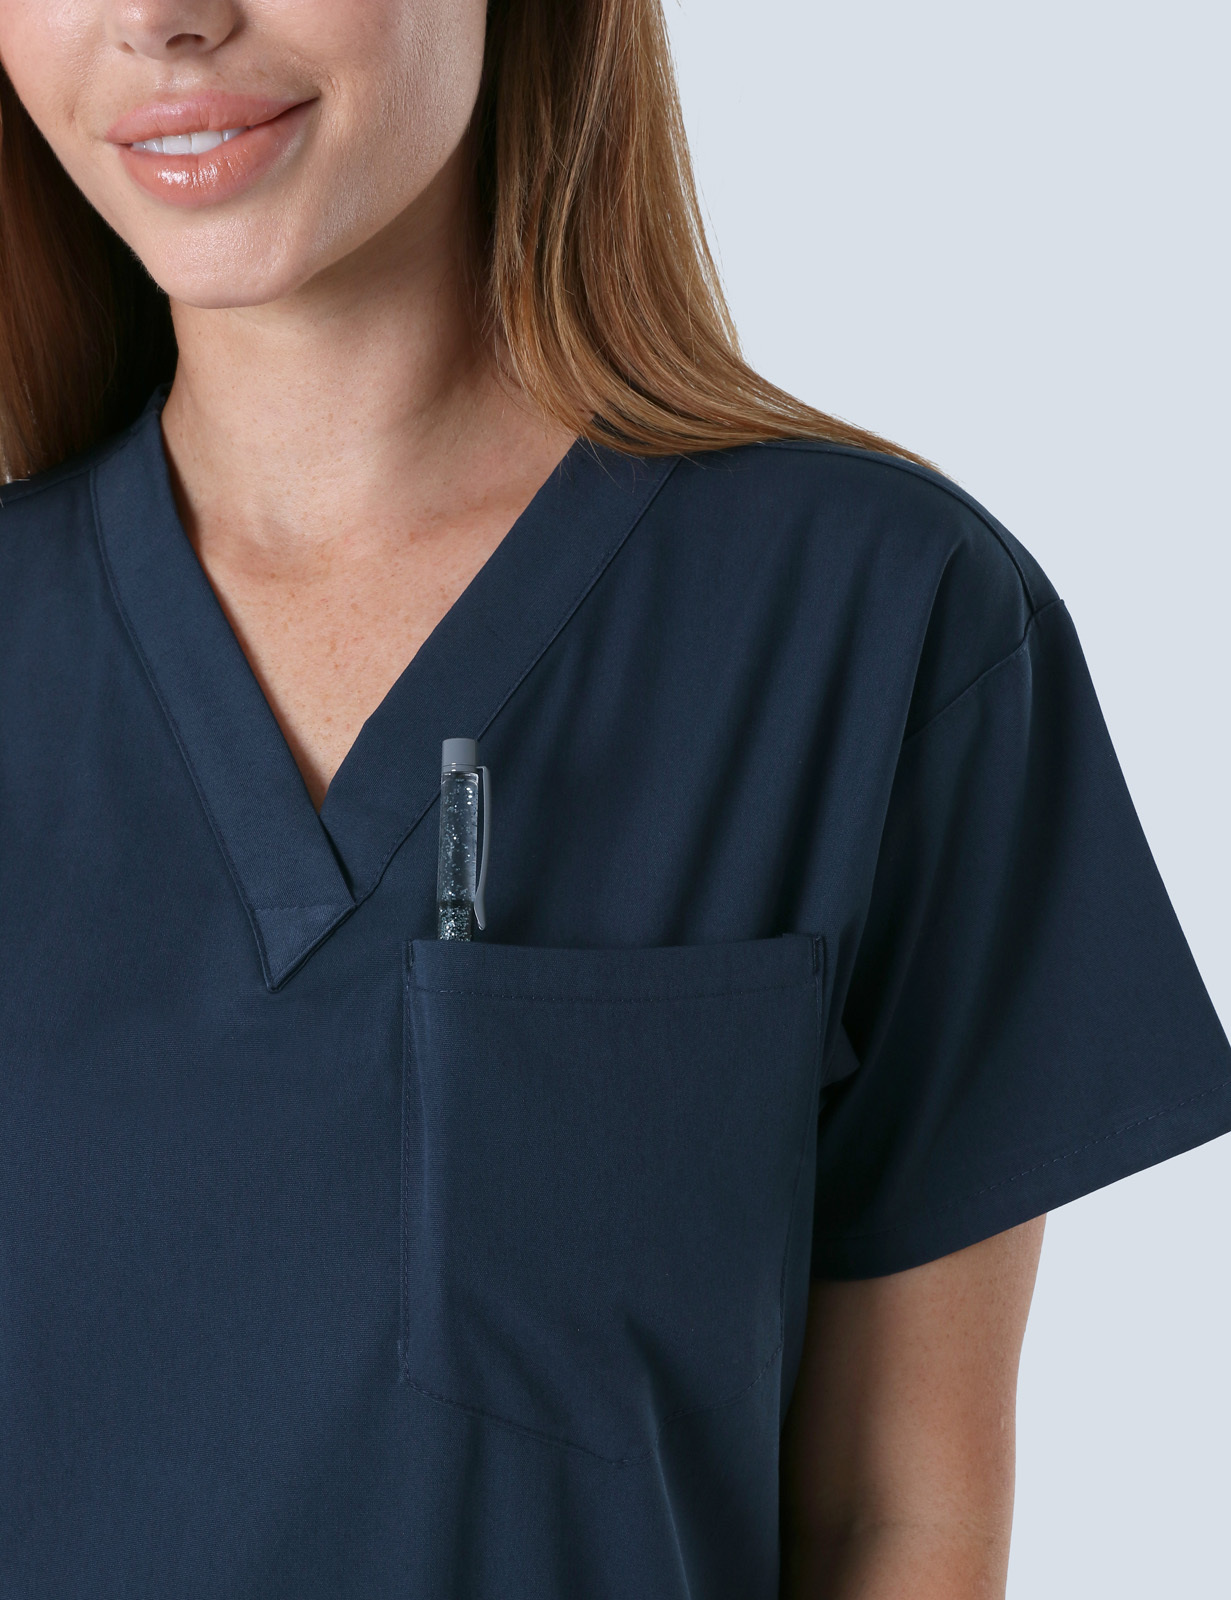 Toowoomba Hospital - Doctor (4 Pocket Scrub Top and Cargo Pants in Navy incl Logos)